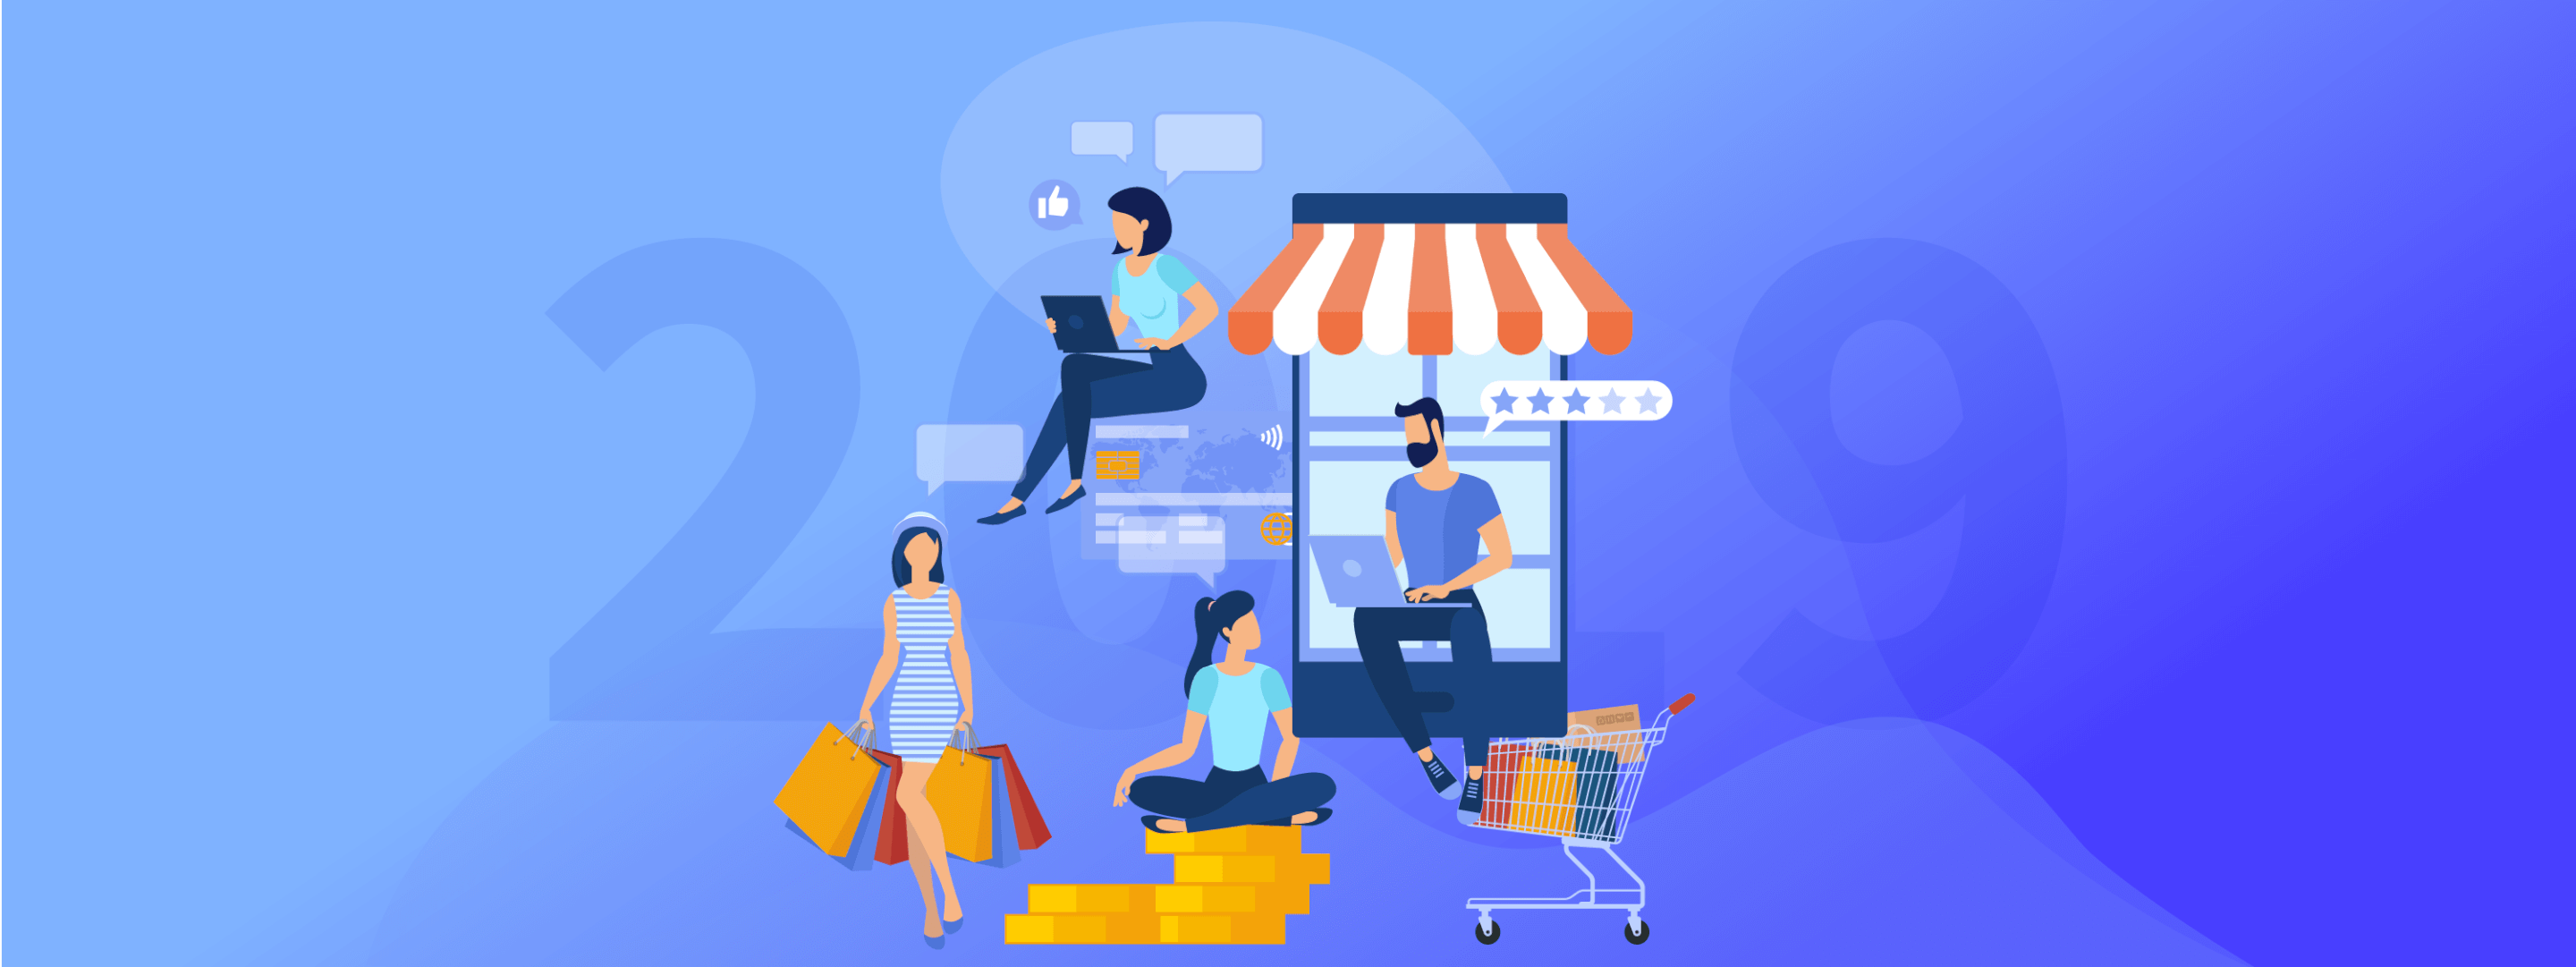 ecommerce marketing automation trends-2019